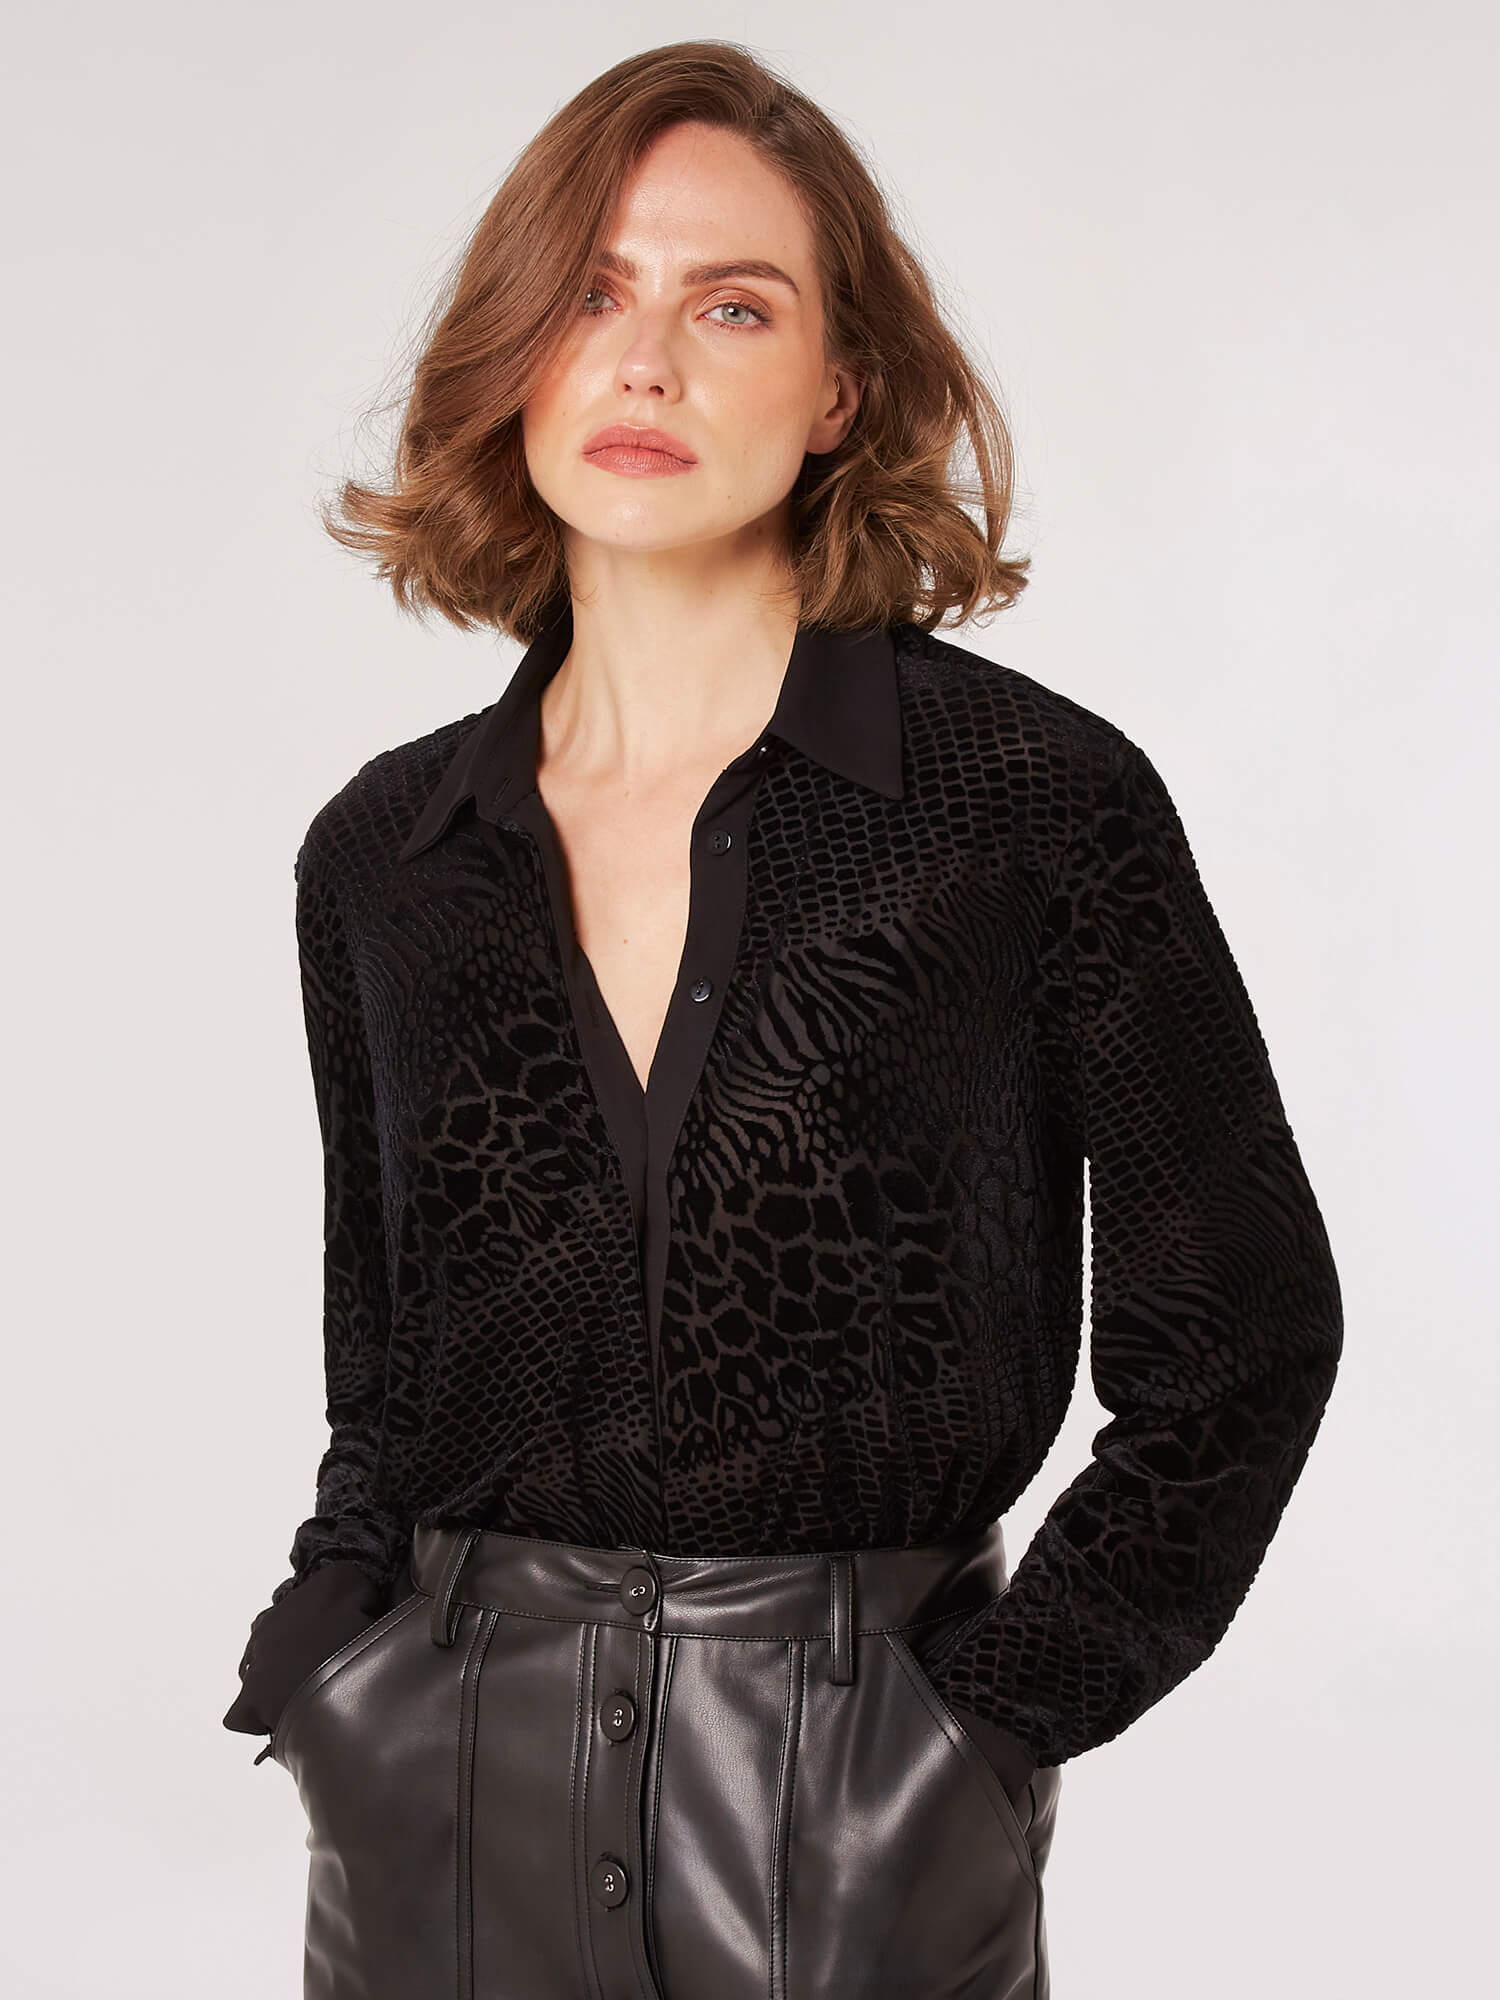 Look wild and stylish with this animal print top! Featuring a tone on tone black pattern and flattering silhouette, this shirt will have you looking your best for any occasion